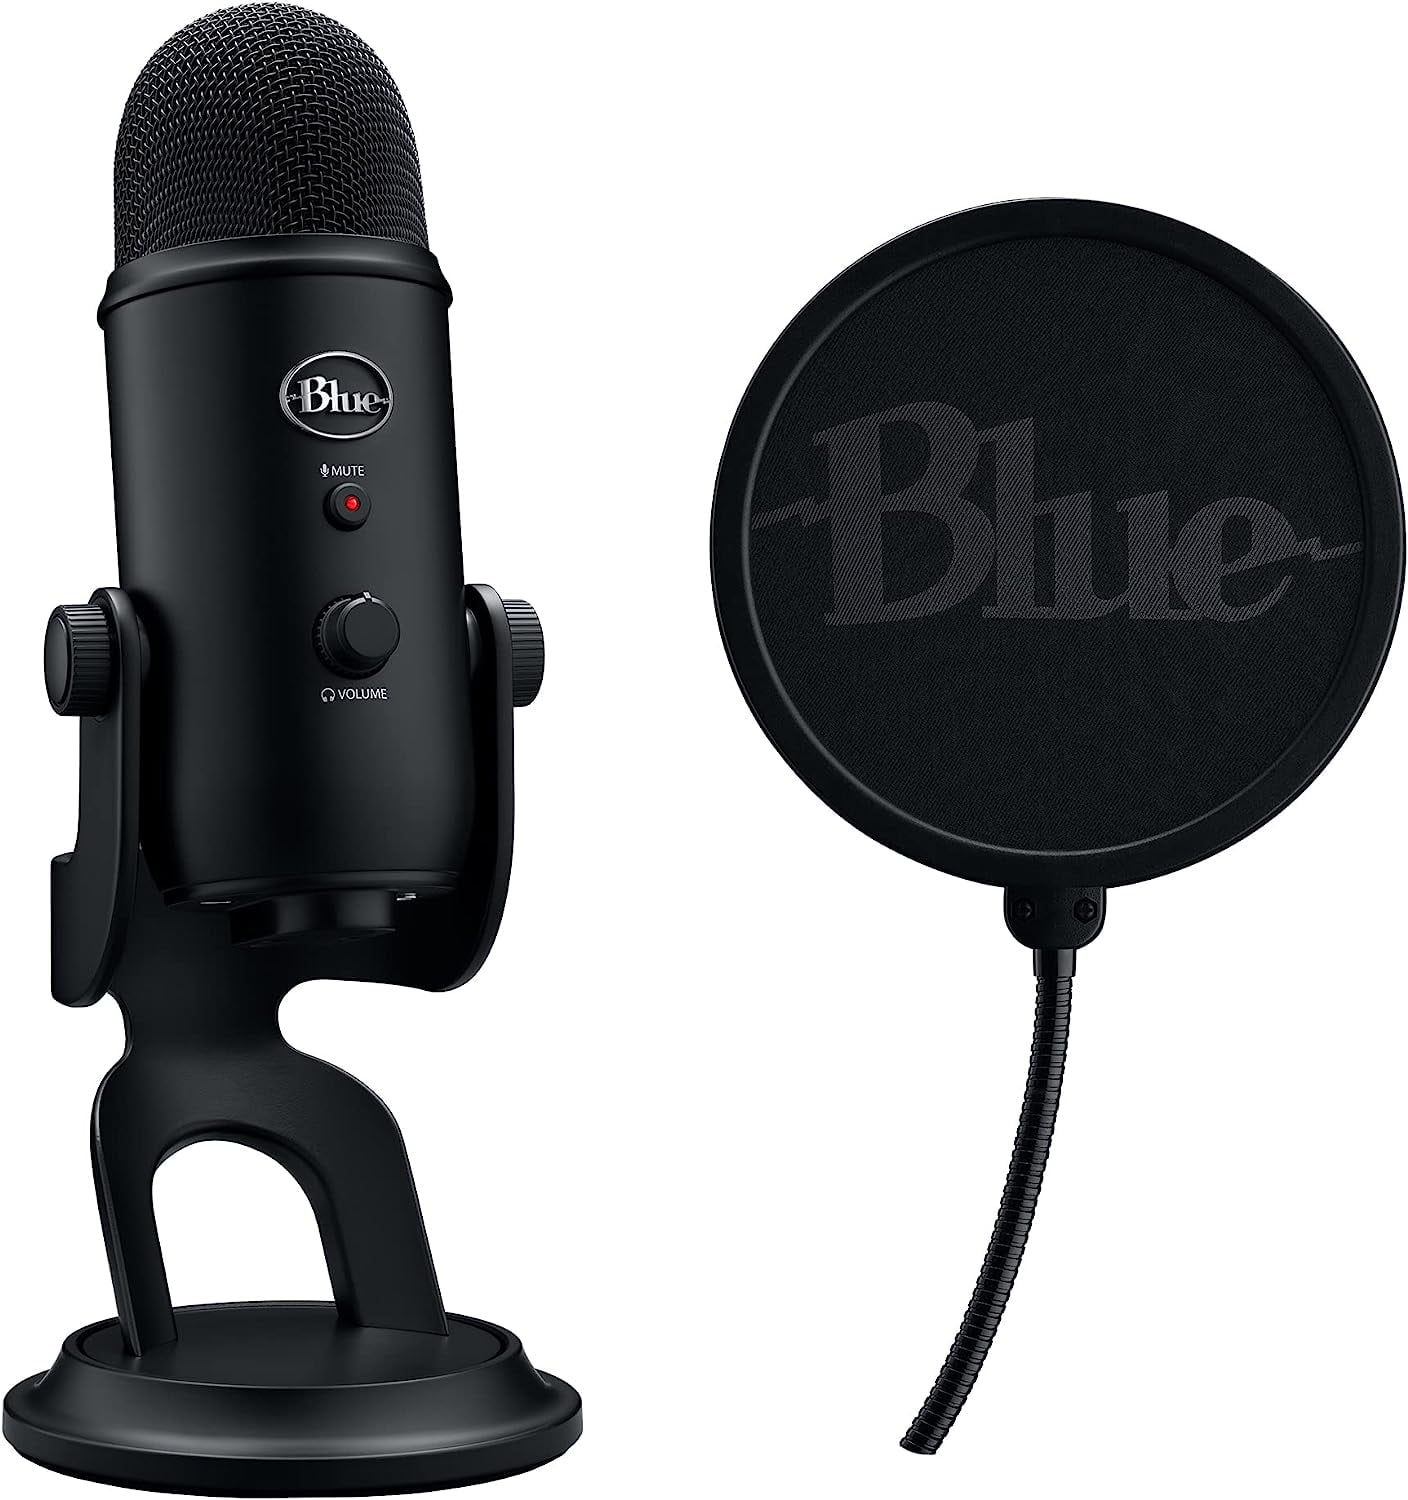  Blue Yeti Blackout USB Professional Multi-Pattern USB Microphone  Plus Pack Bundle with Presonus StudioOne 5 Artist DAW, iZotope RX Elements  Plug-in and Groover 3 Tutorials 3-Month Subscription : Musical Instruments